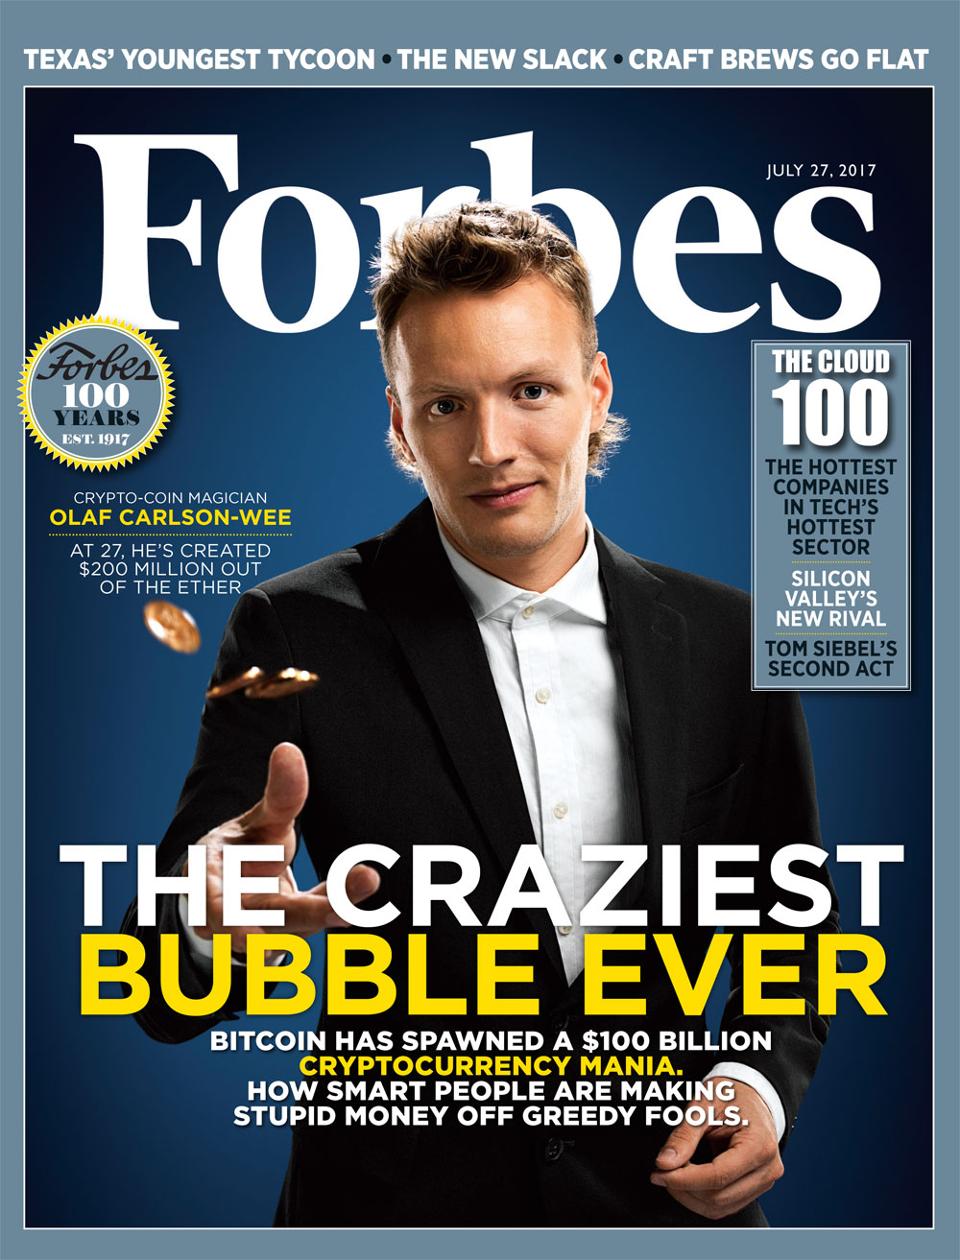 aaa0705_forbes-cover-bubble-cloud-100-07272017_1000x1313.jpg